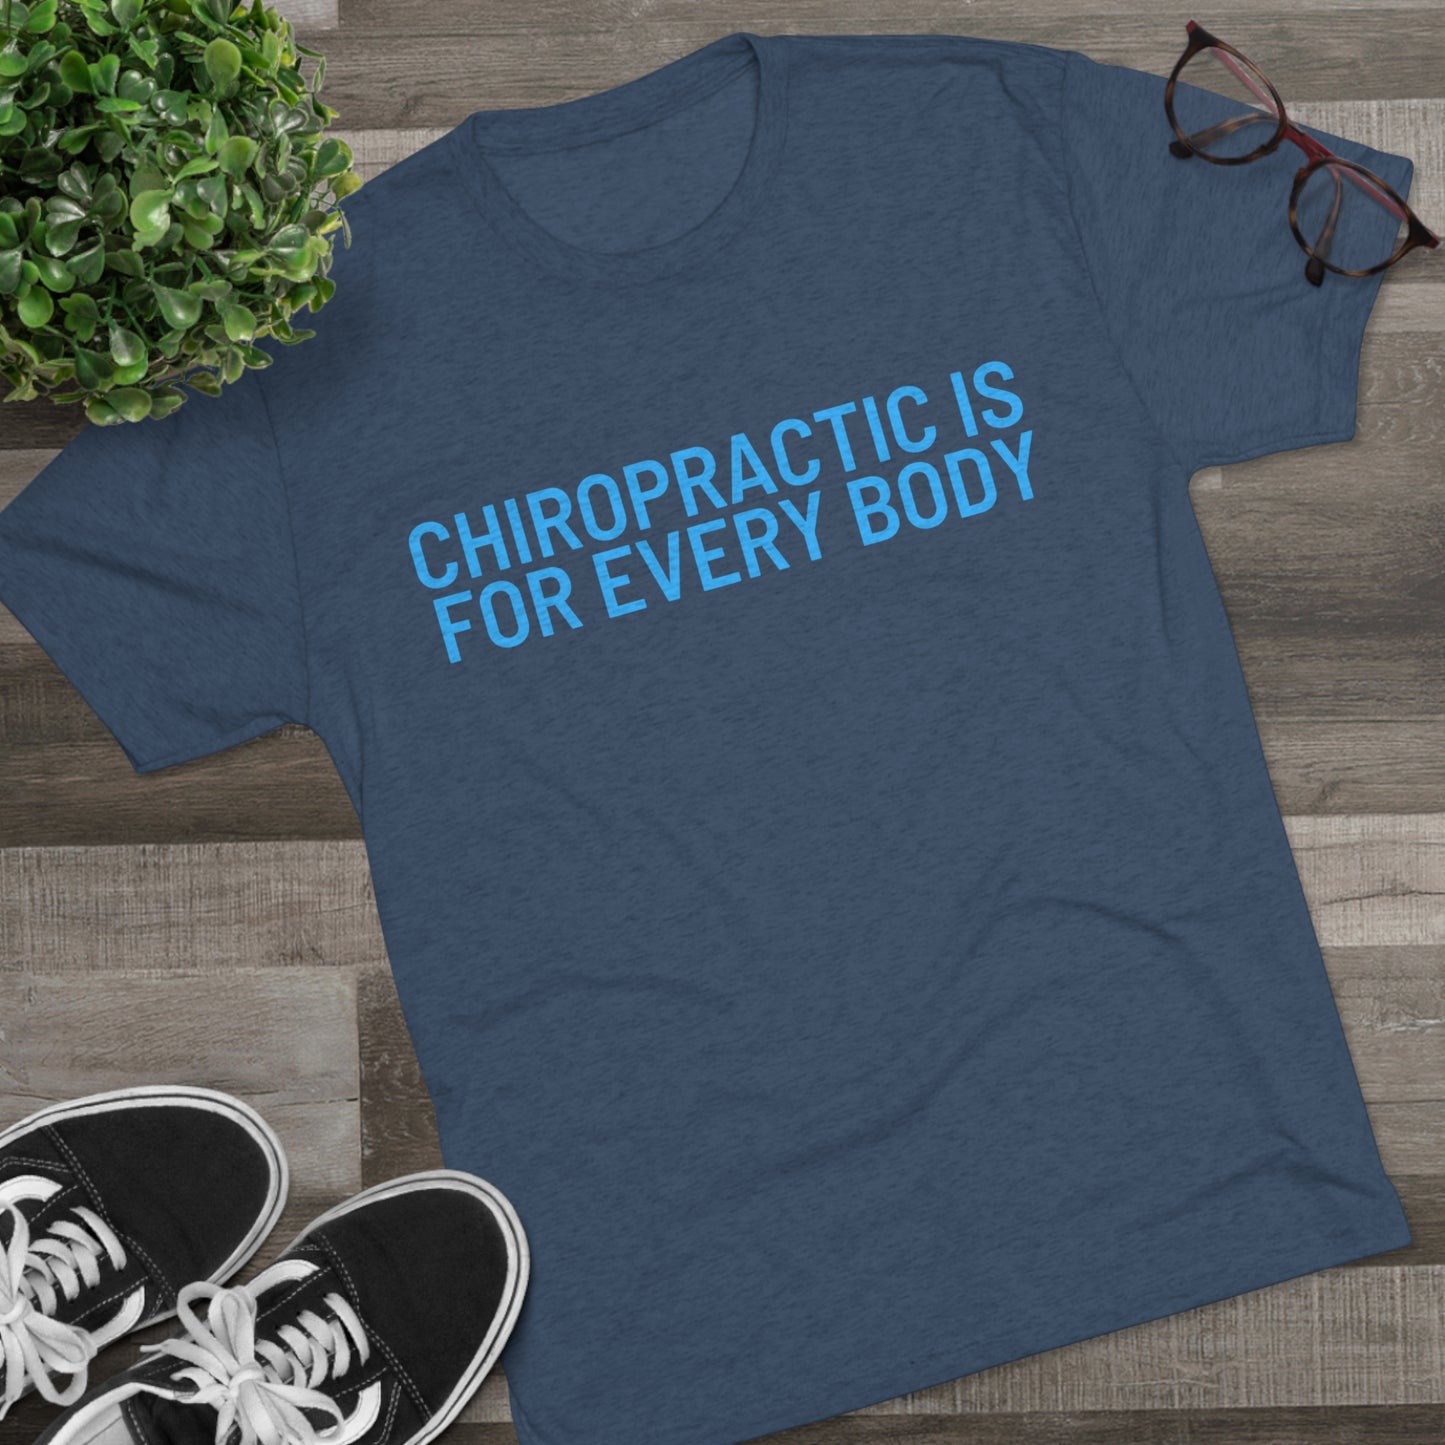 Chiropractic Is For Every Body v3 - Next Level Men's Tri-Blend Crew Tee